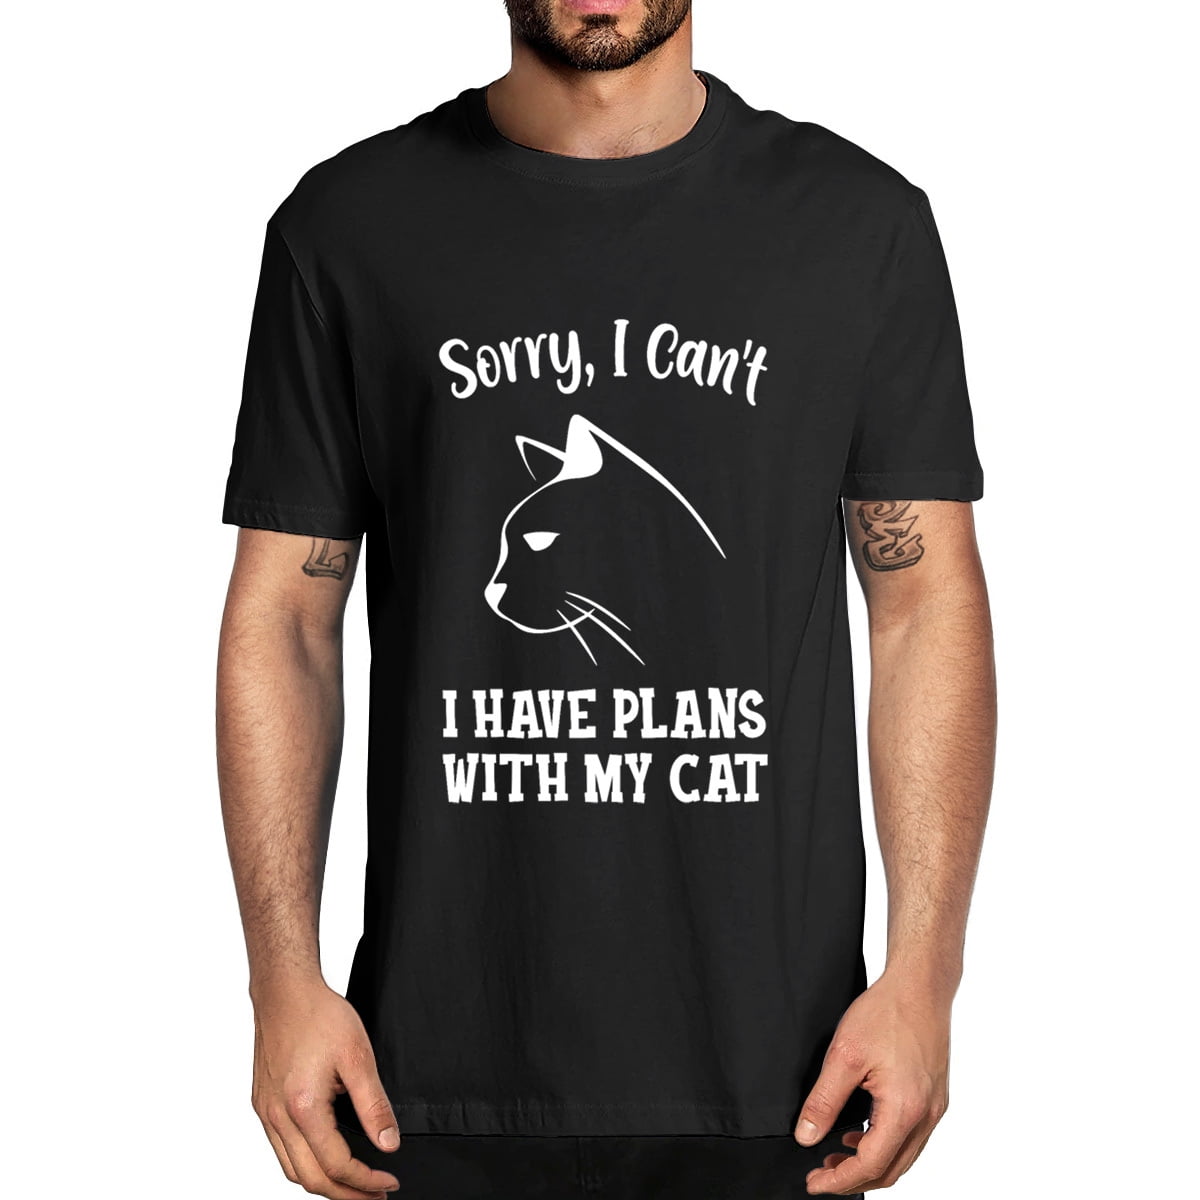 Sorry I Can't I Have Plans with My Cat Womens Short Sleeve Cotton Black T-shirt